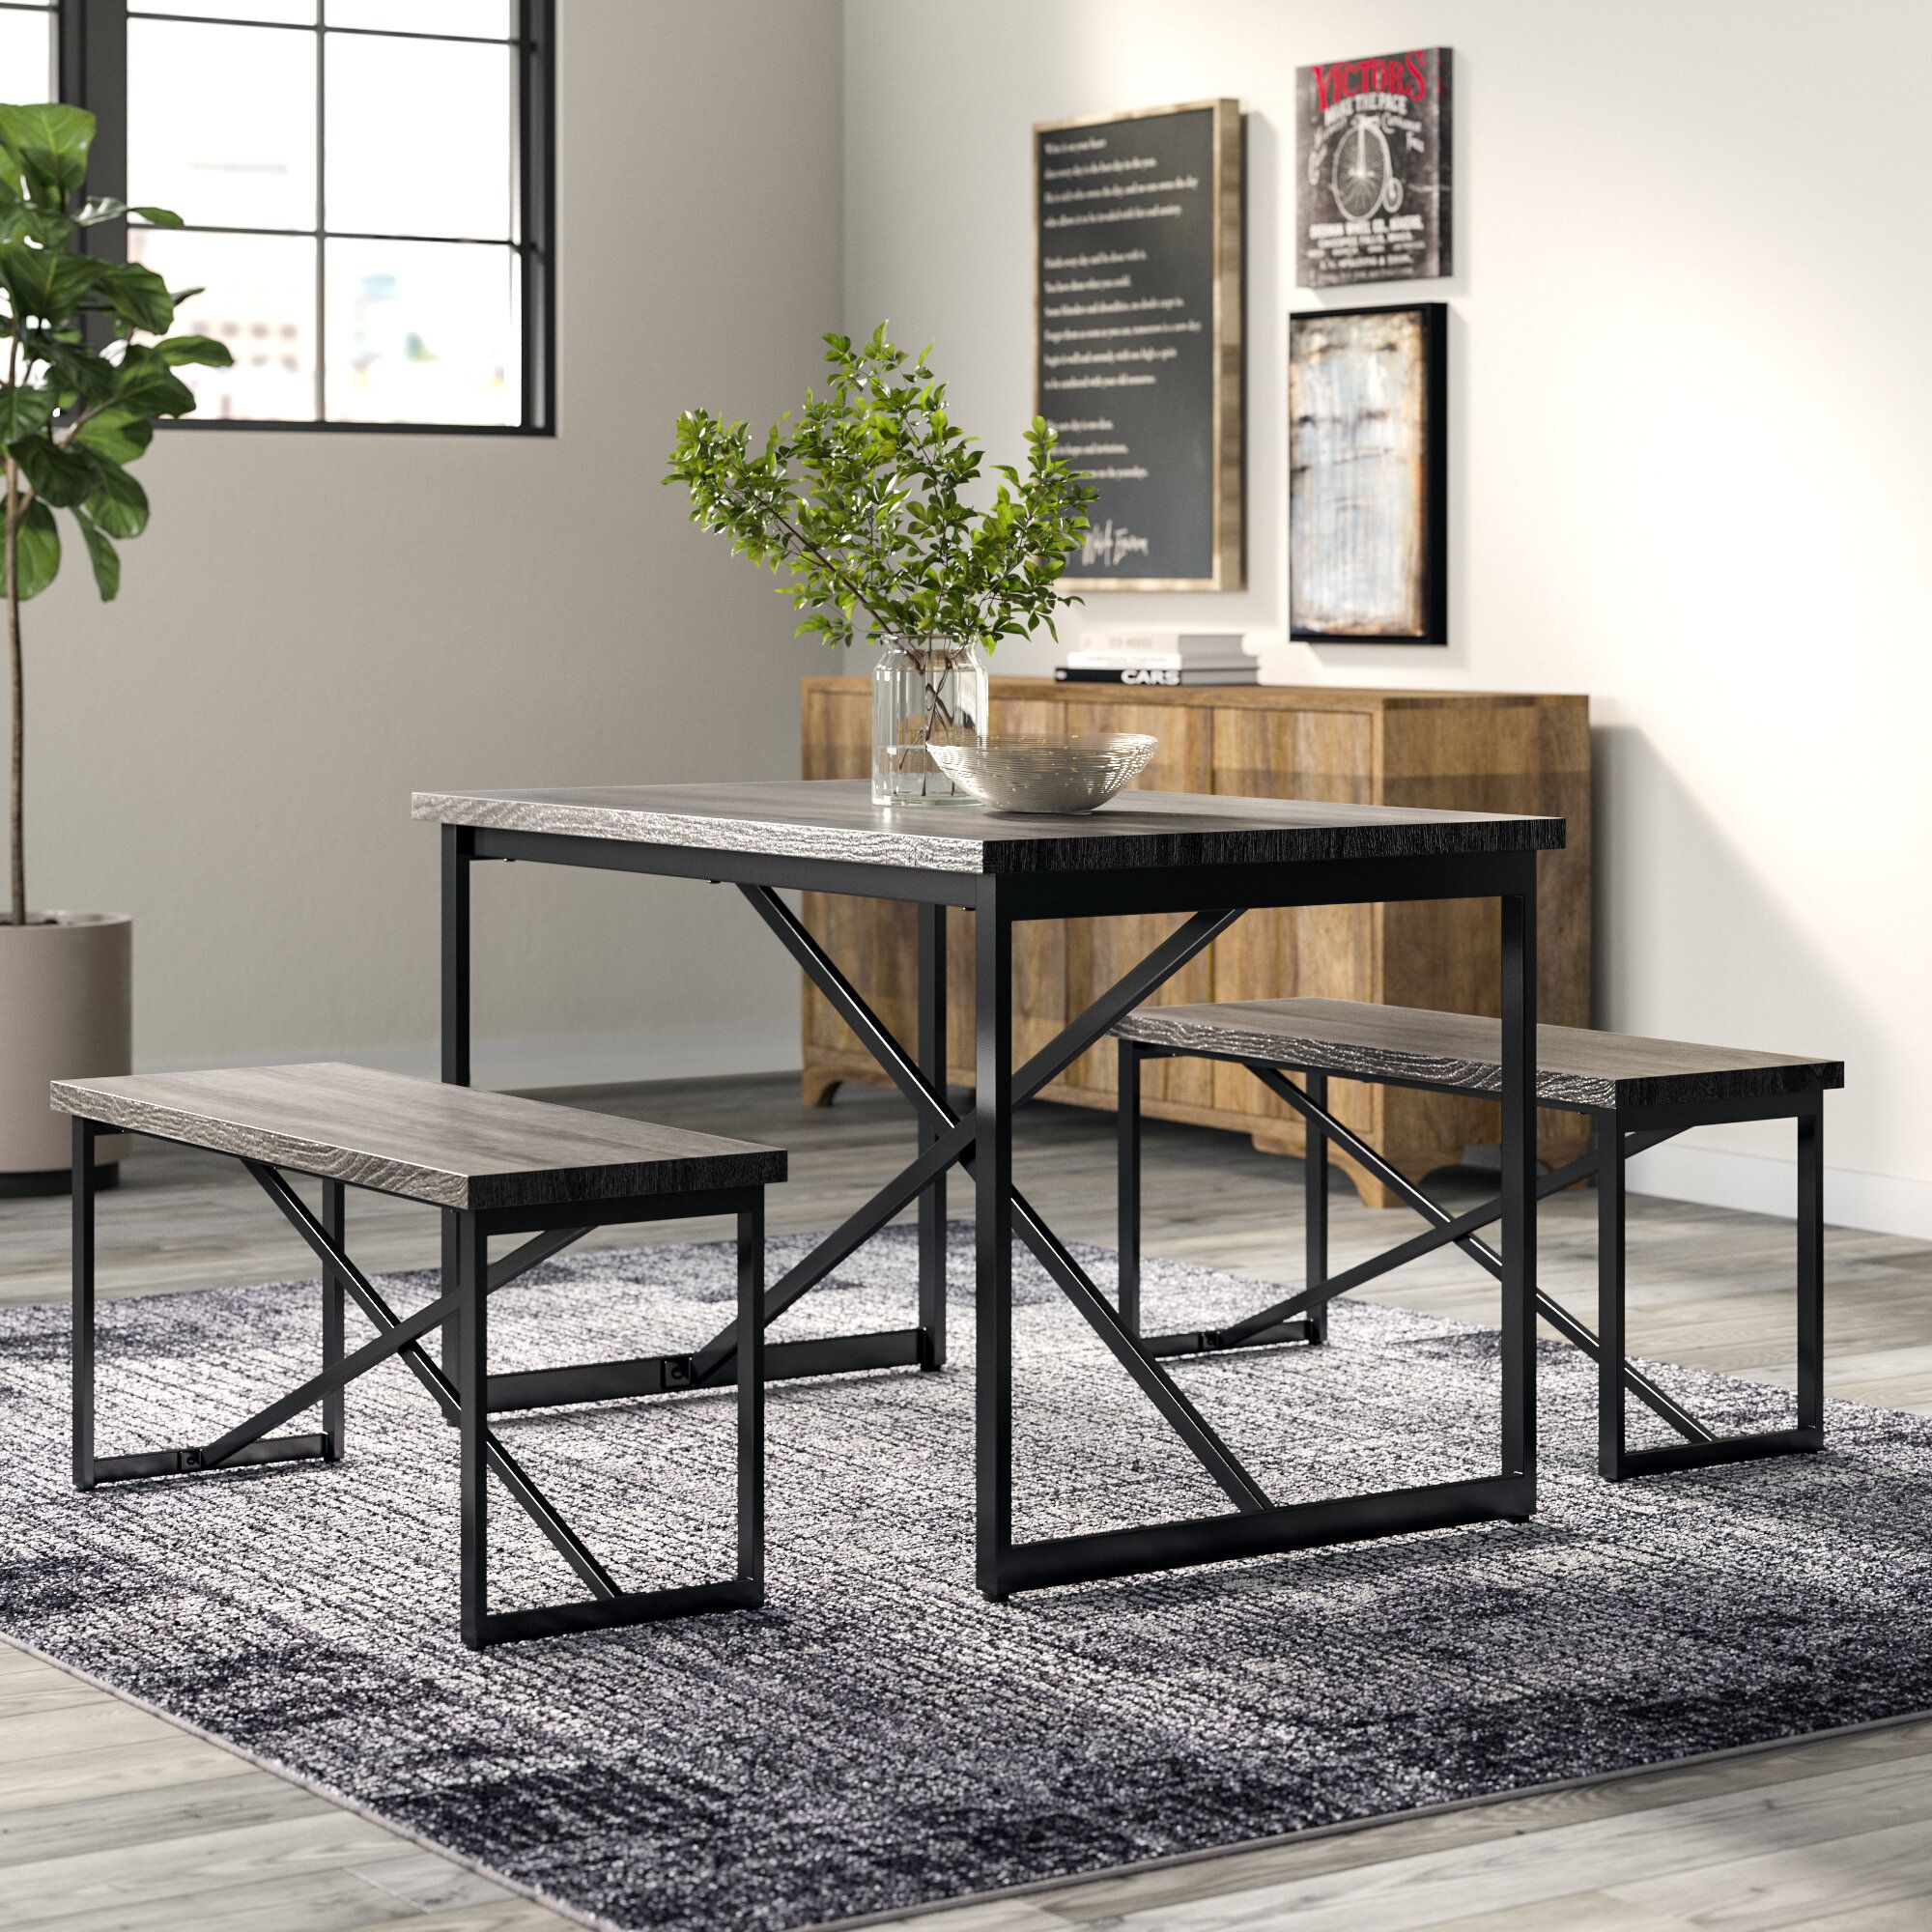 Bearden 3 Piece Dining Set With Recent Bearden 3 Piece Dining Sets (View 2 of 20)